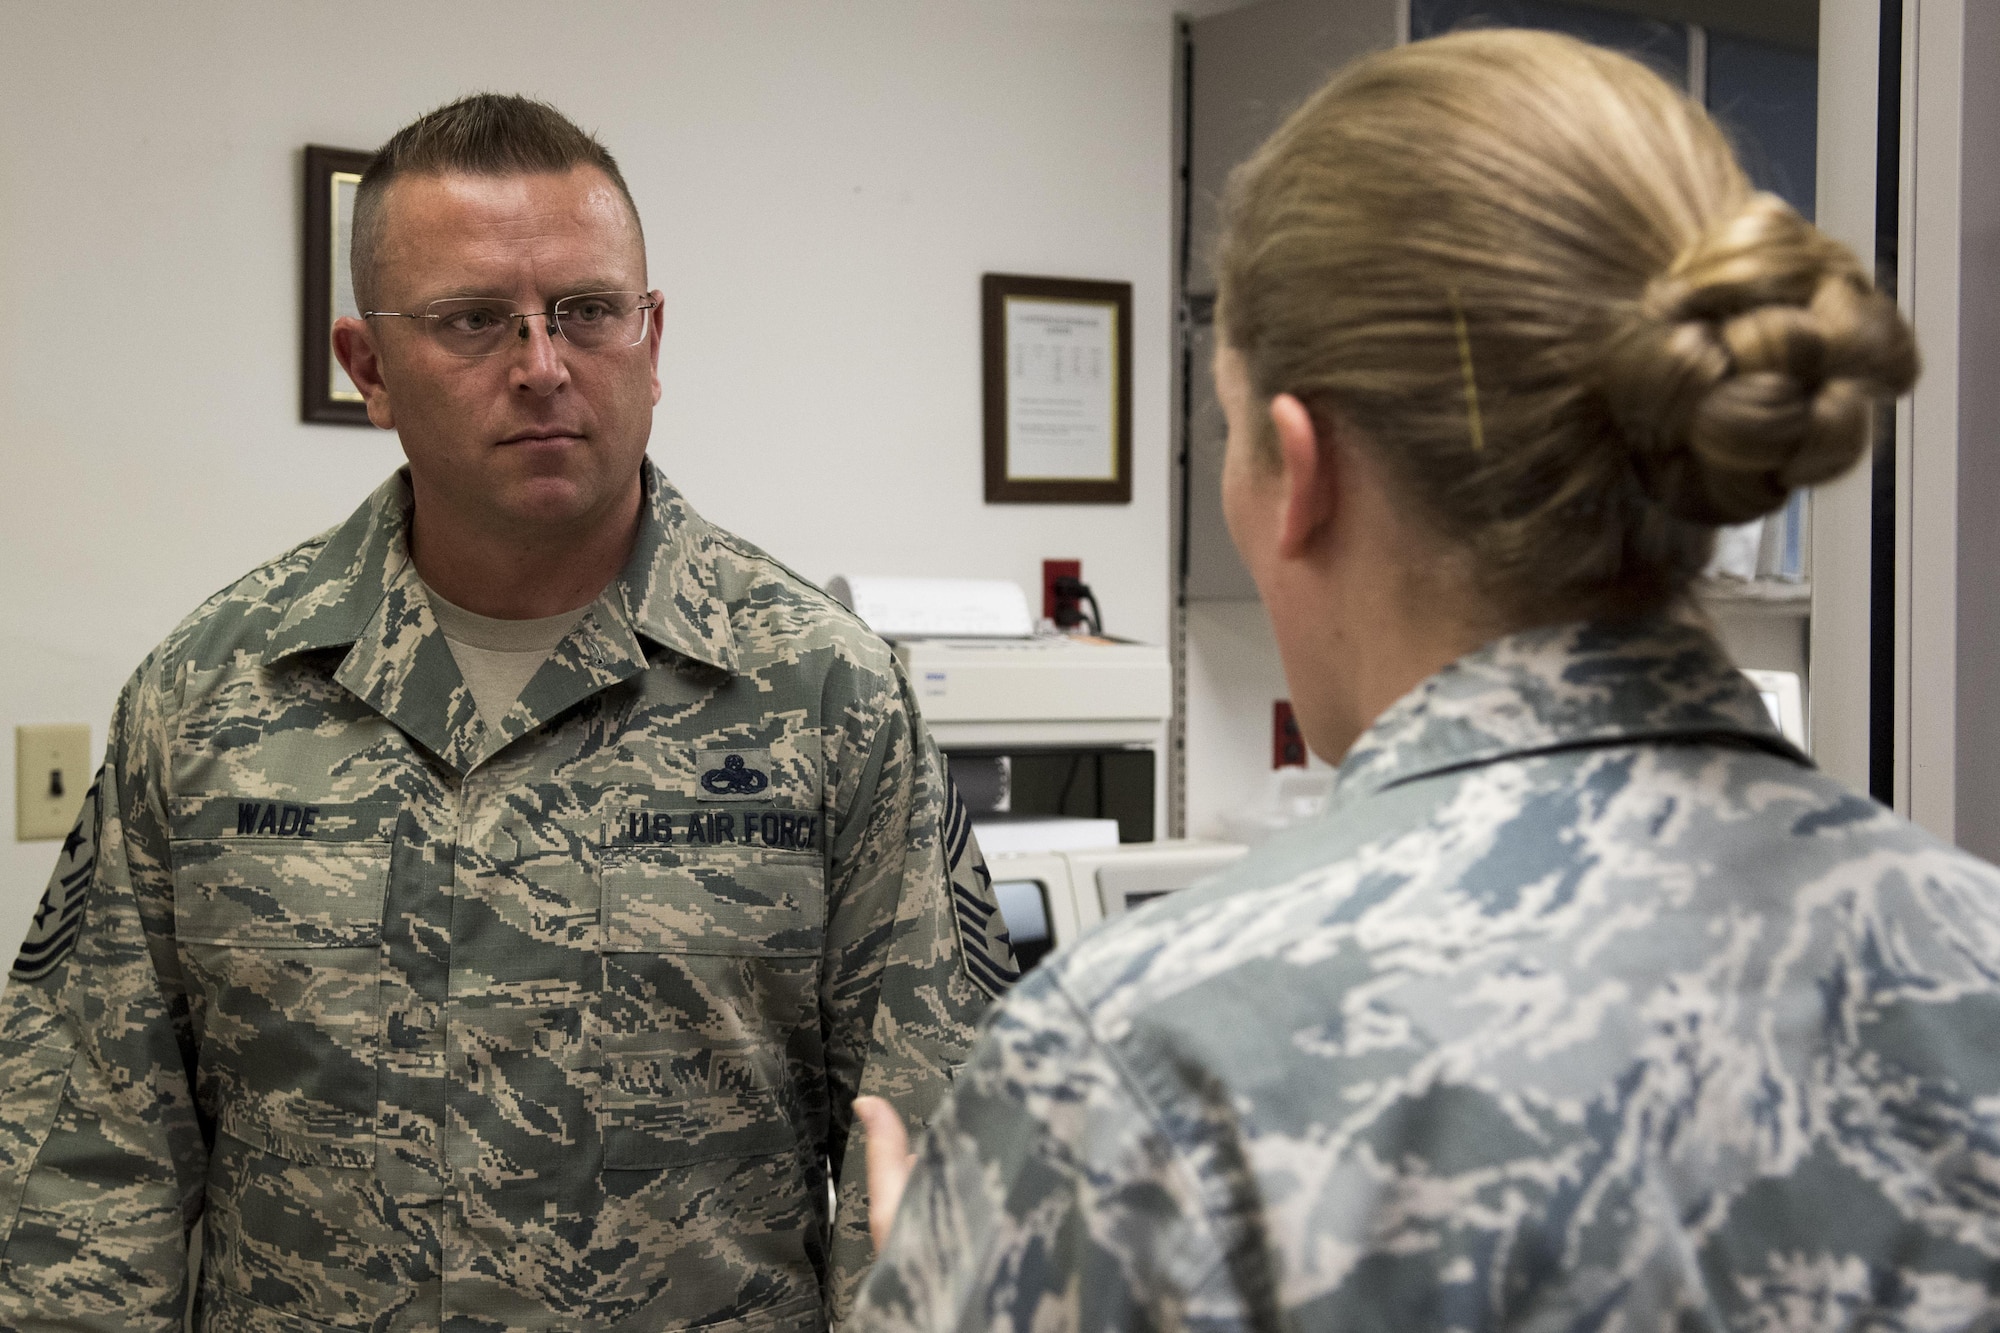 U.S. Air Force Chief Master Sgt. David Wade, left, 9th Air Force command chief, visits the 4th Medical Support Squadron laboratory and speaks with Staff Sgt. Erin Holmquist, 4th MDSS NCO in-charge of hematology, Aug. 14, 2017, at Seymour Johnson Air Force Base, N.C. Wade visited various 4th Medical Group flights and spoke with Airmen about their mission to provide health care to those supporting Strike Eagle airpower. (U.S. Air Force photo by Airman 1st Class Shawna L. Keyes)